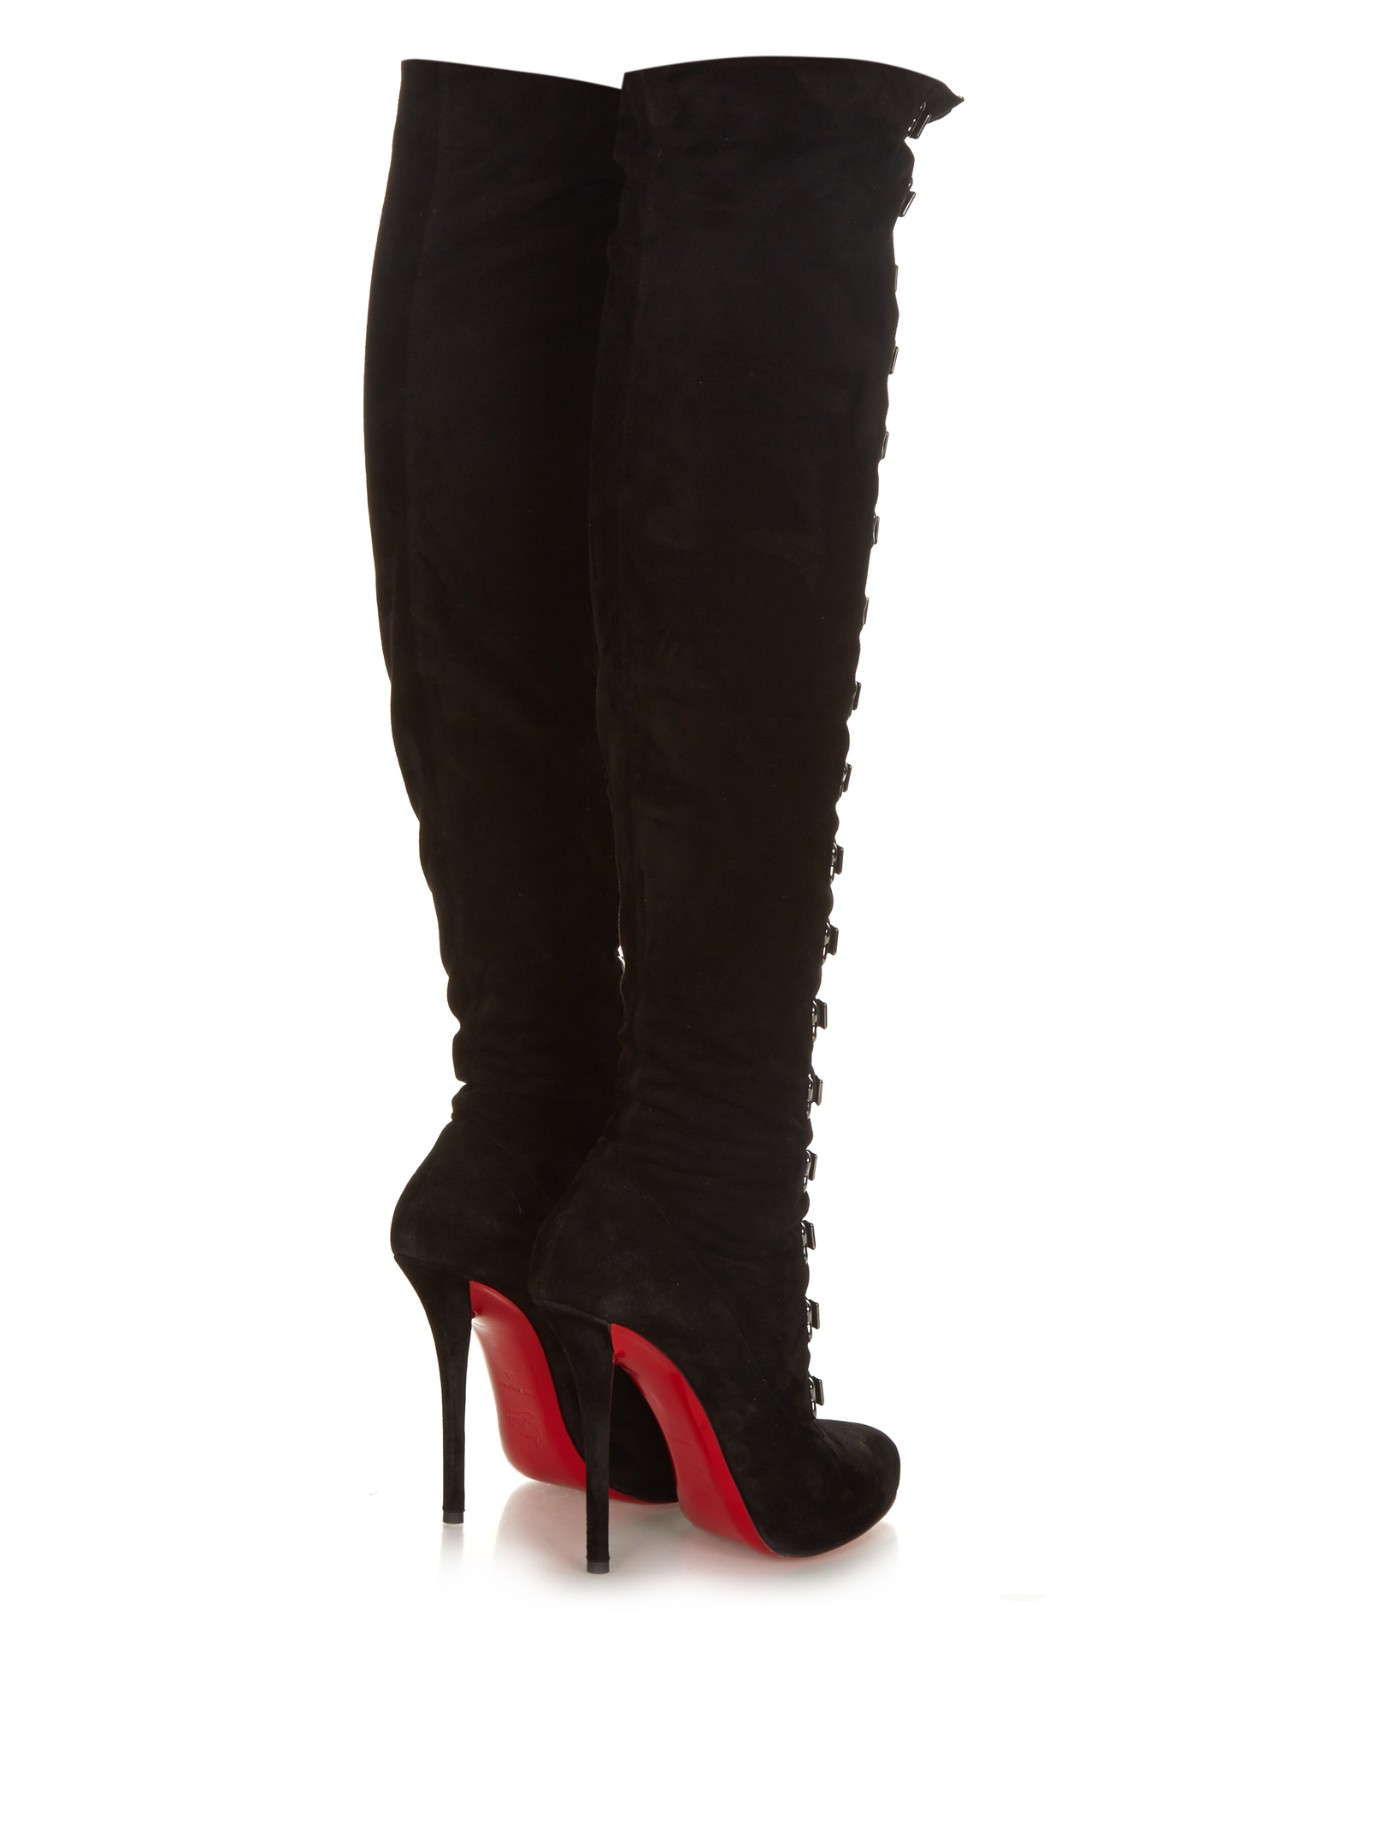 Christian Louboutin Top Croche Suede Over-The-Knee Boots in Black | Lyst